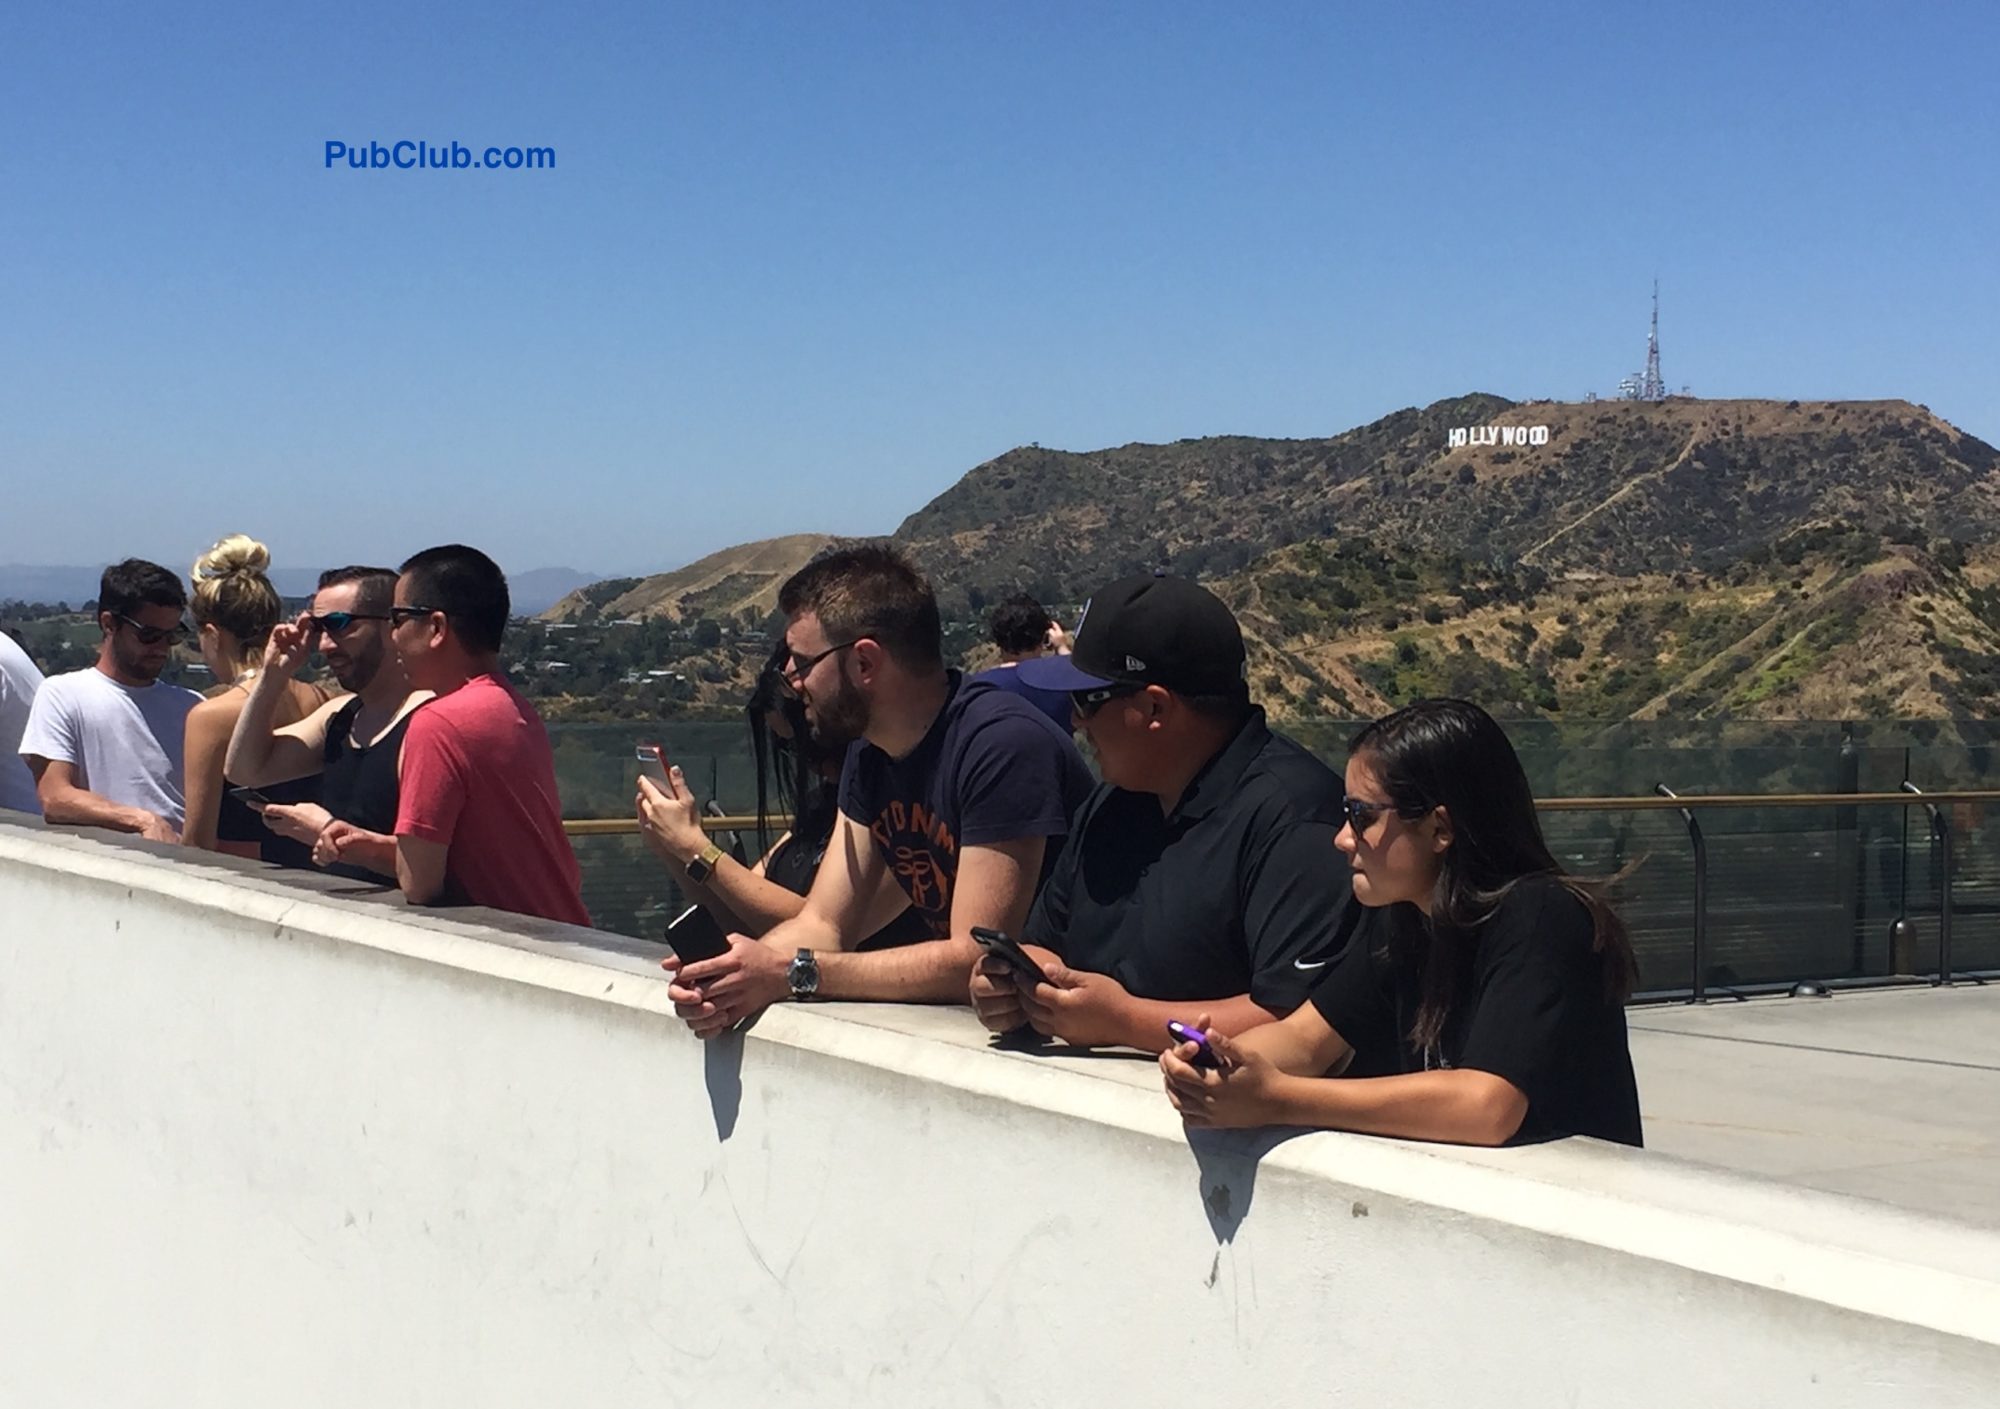 Hollywood sign Griffith Park Observatory tourists